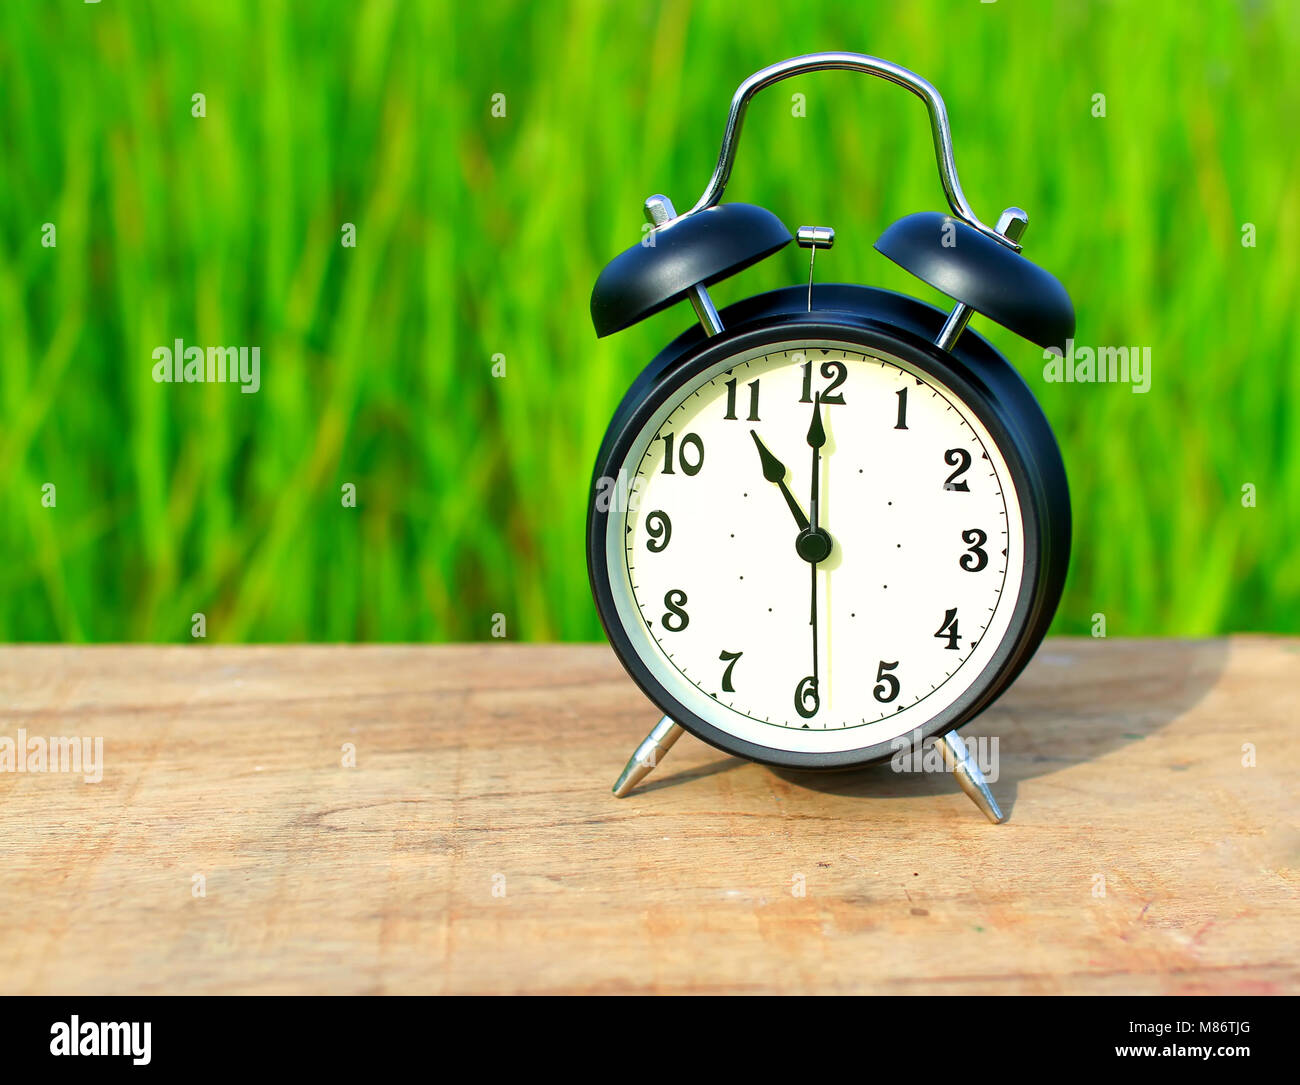 Alarm clock on table with grass background Stock Photo